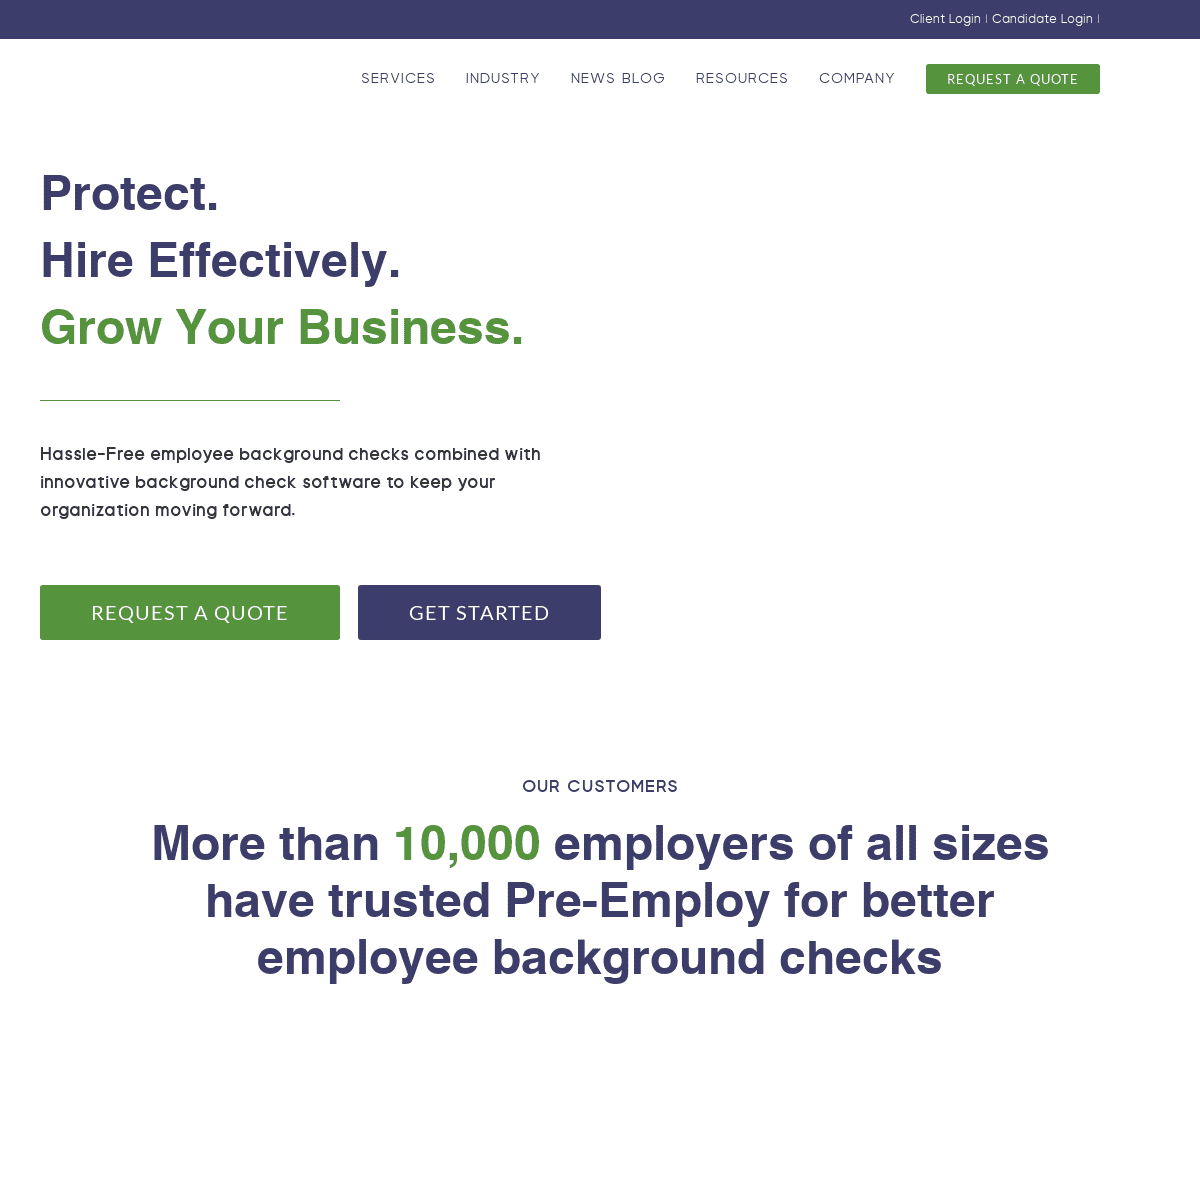 A complete backup of https://pre-employ.com